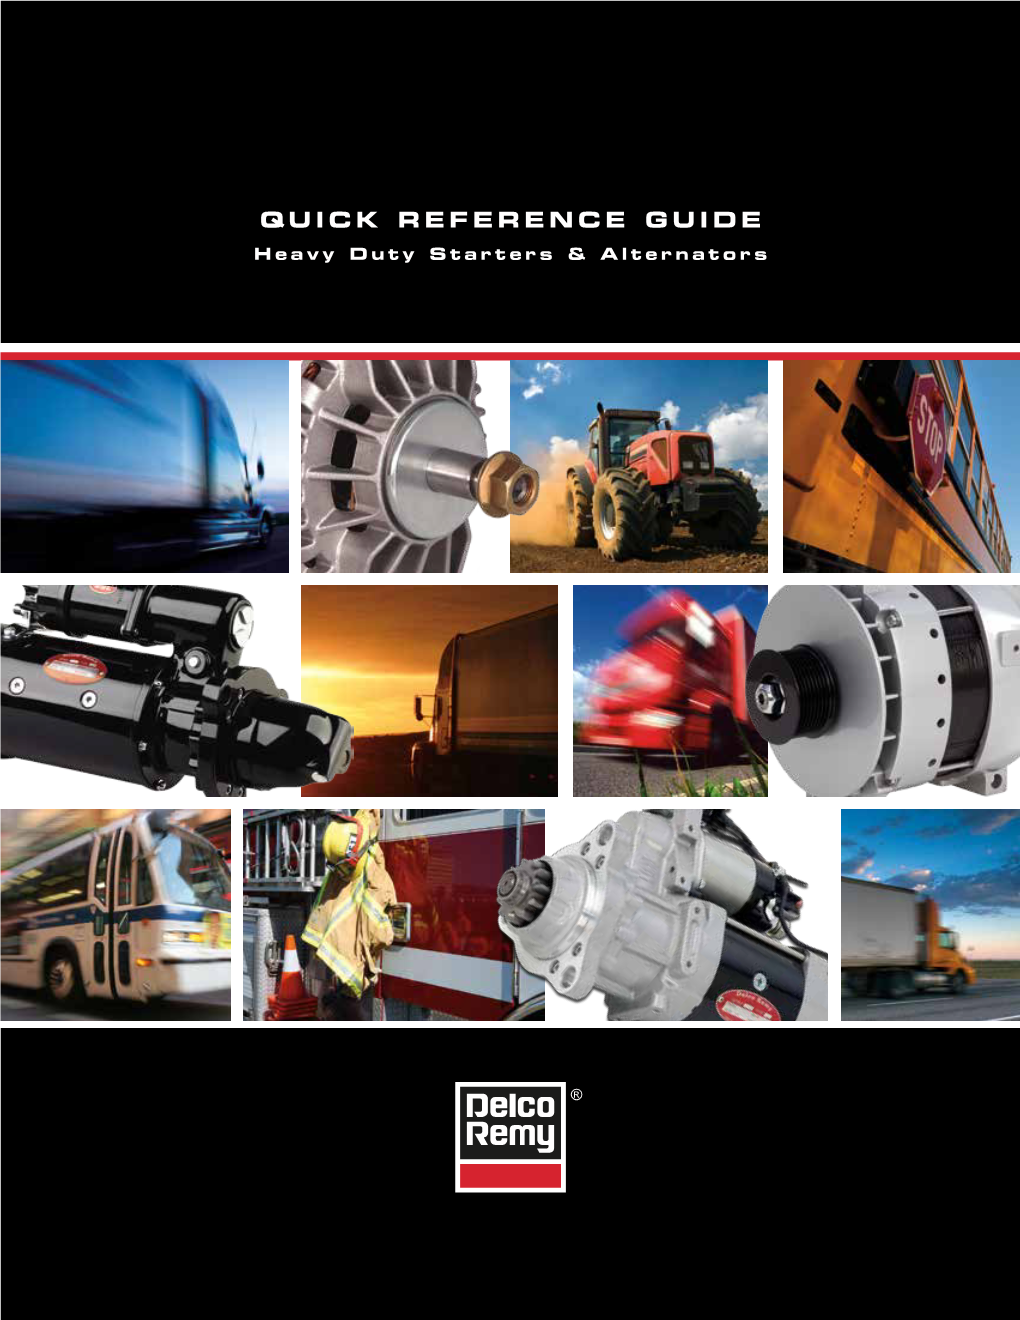 QUICK REFERENCE GUIDE Heavy Duty Starters & Alternators Contents